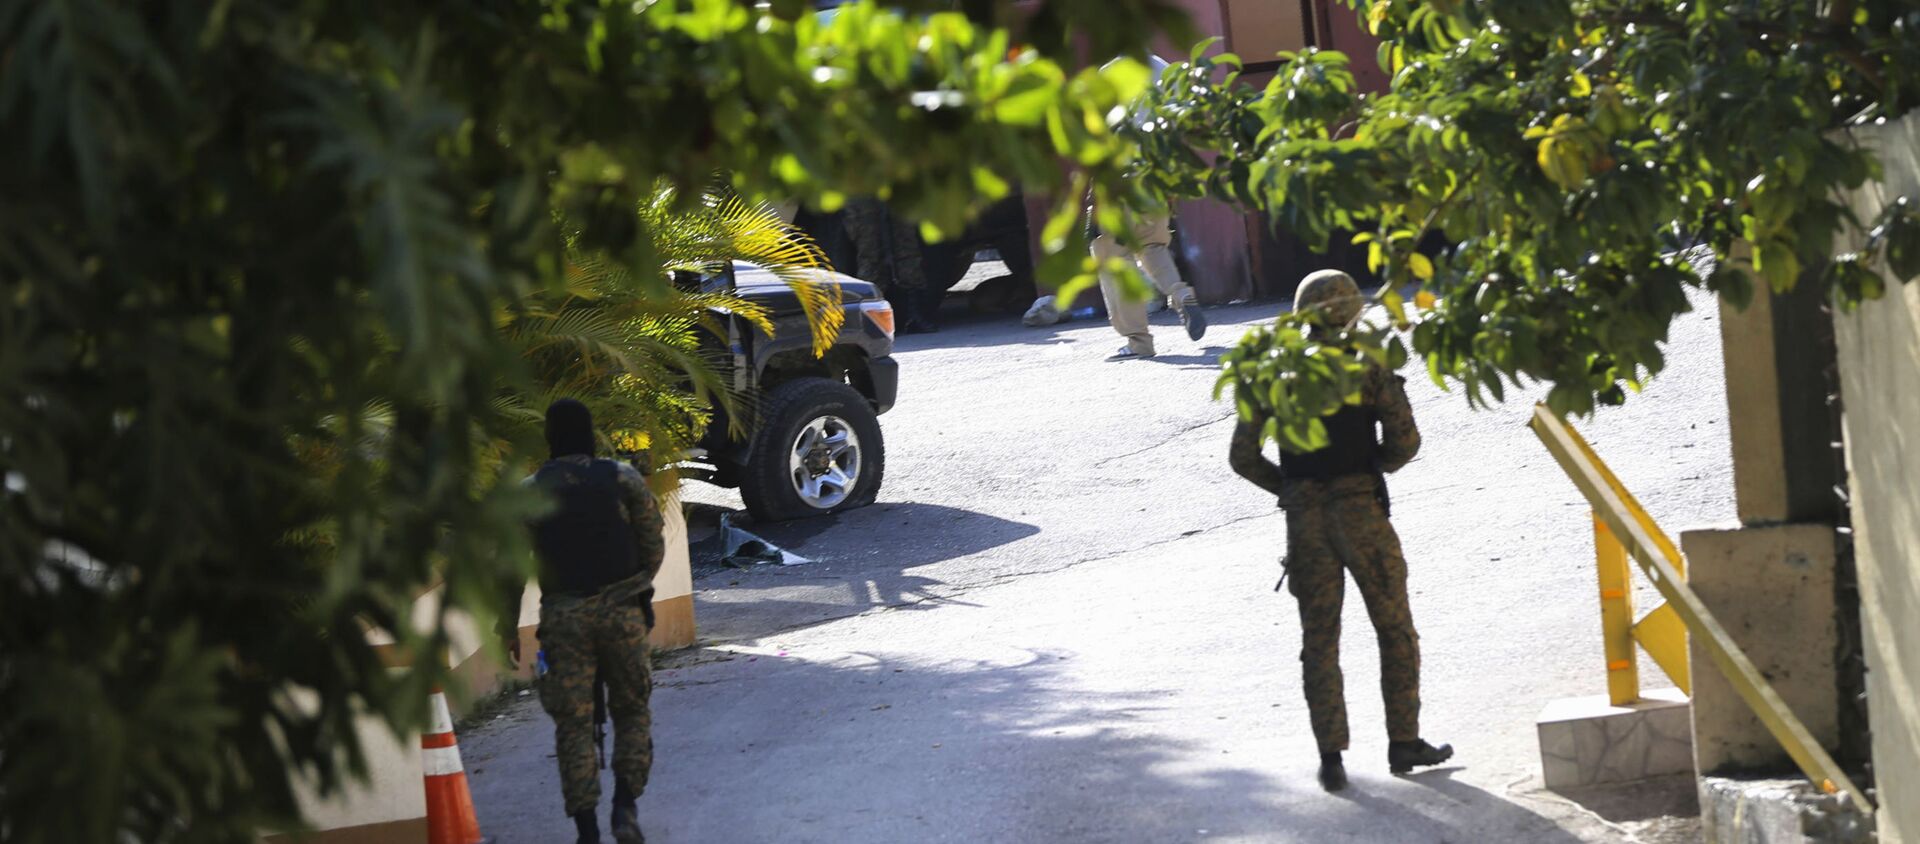 Soldiers stand guard at the entrance to the house of late Haitian President Jovenel Moise in Port-au-Prince, Haiti, Wednesday, July 7, 2021. Moïse was assassinated in an attack on his private residence early Wednesday, and first lady Martine Moïse was shot in the overnight attack and hospitalized, according to a statement from the country’s interim prime minister. (AP Photo/Joseph Odelyn) - 俄羅斯衛星通訊社, 1920, 19.10.2021